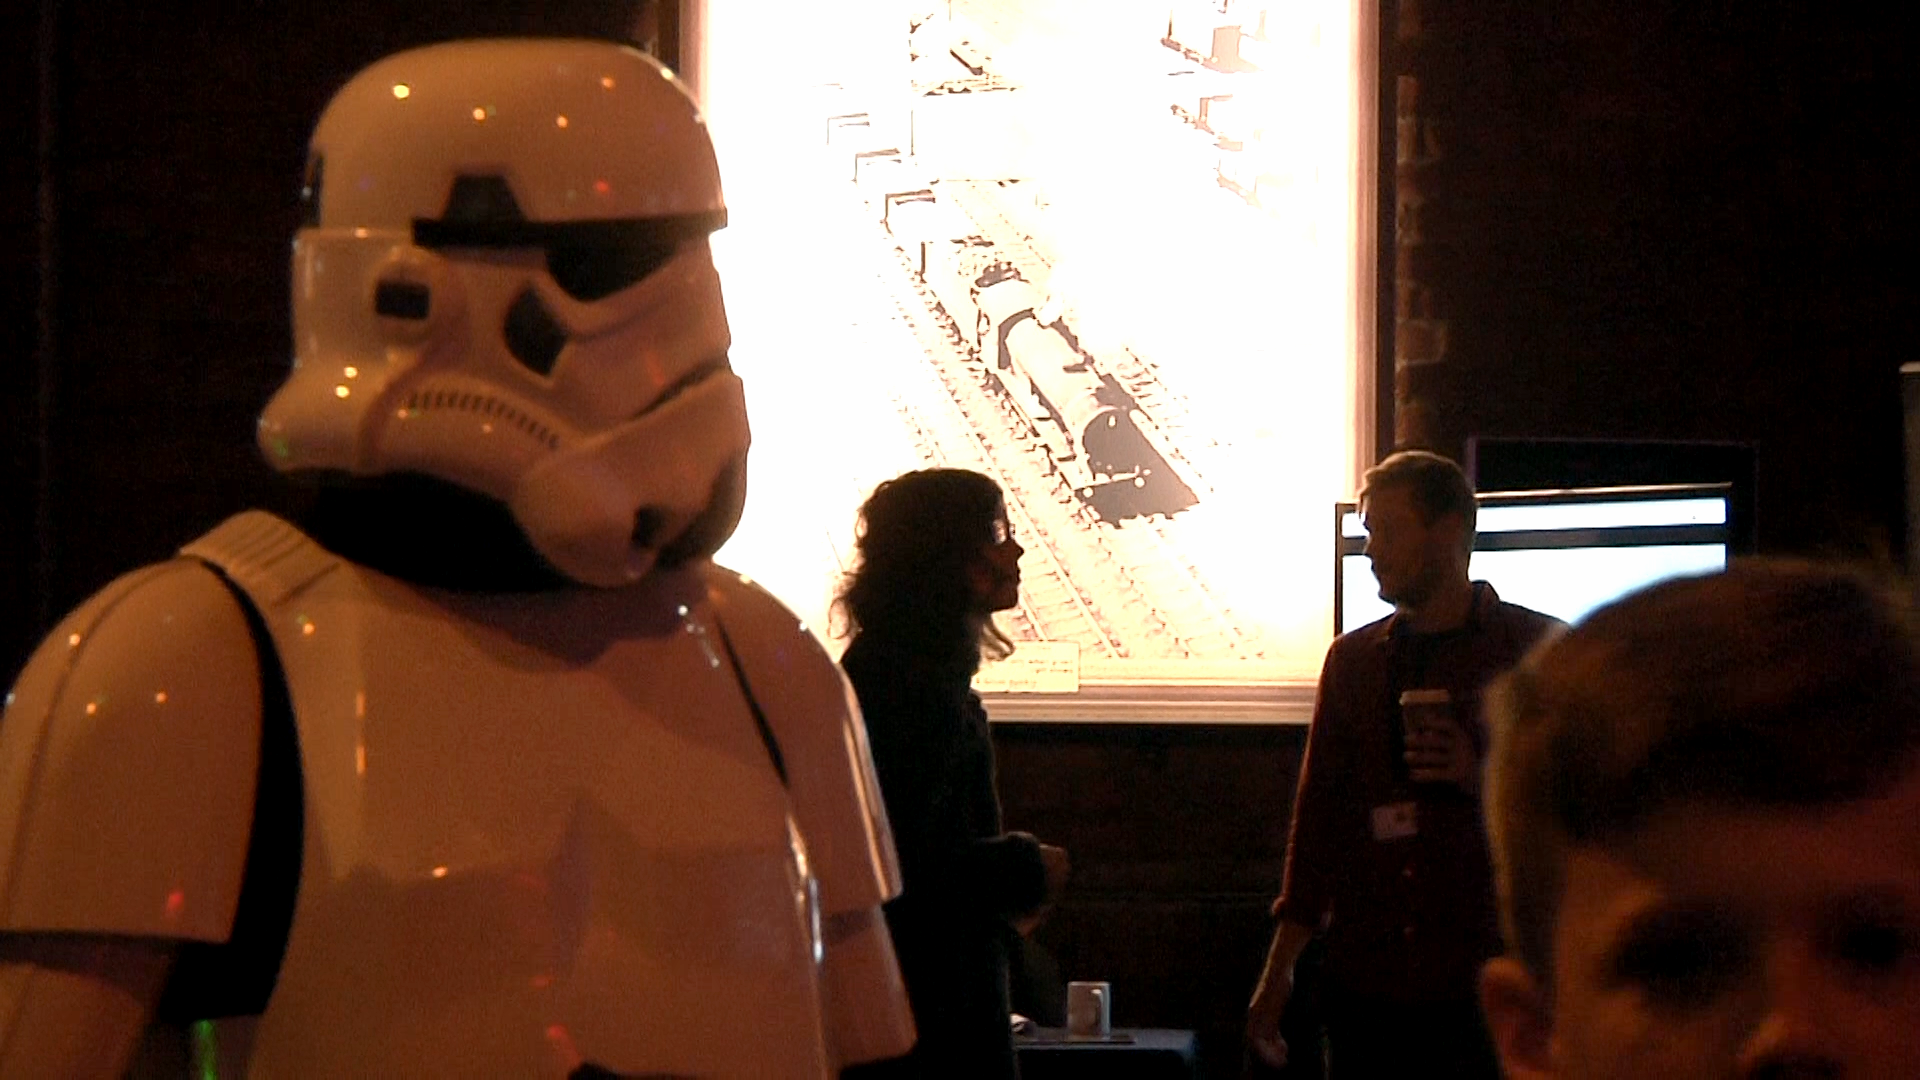 Stormtroopers invade the University of Lincoln Engine Shed as part of the Future 2.0 event. Photo: Lewis Foster